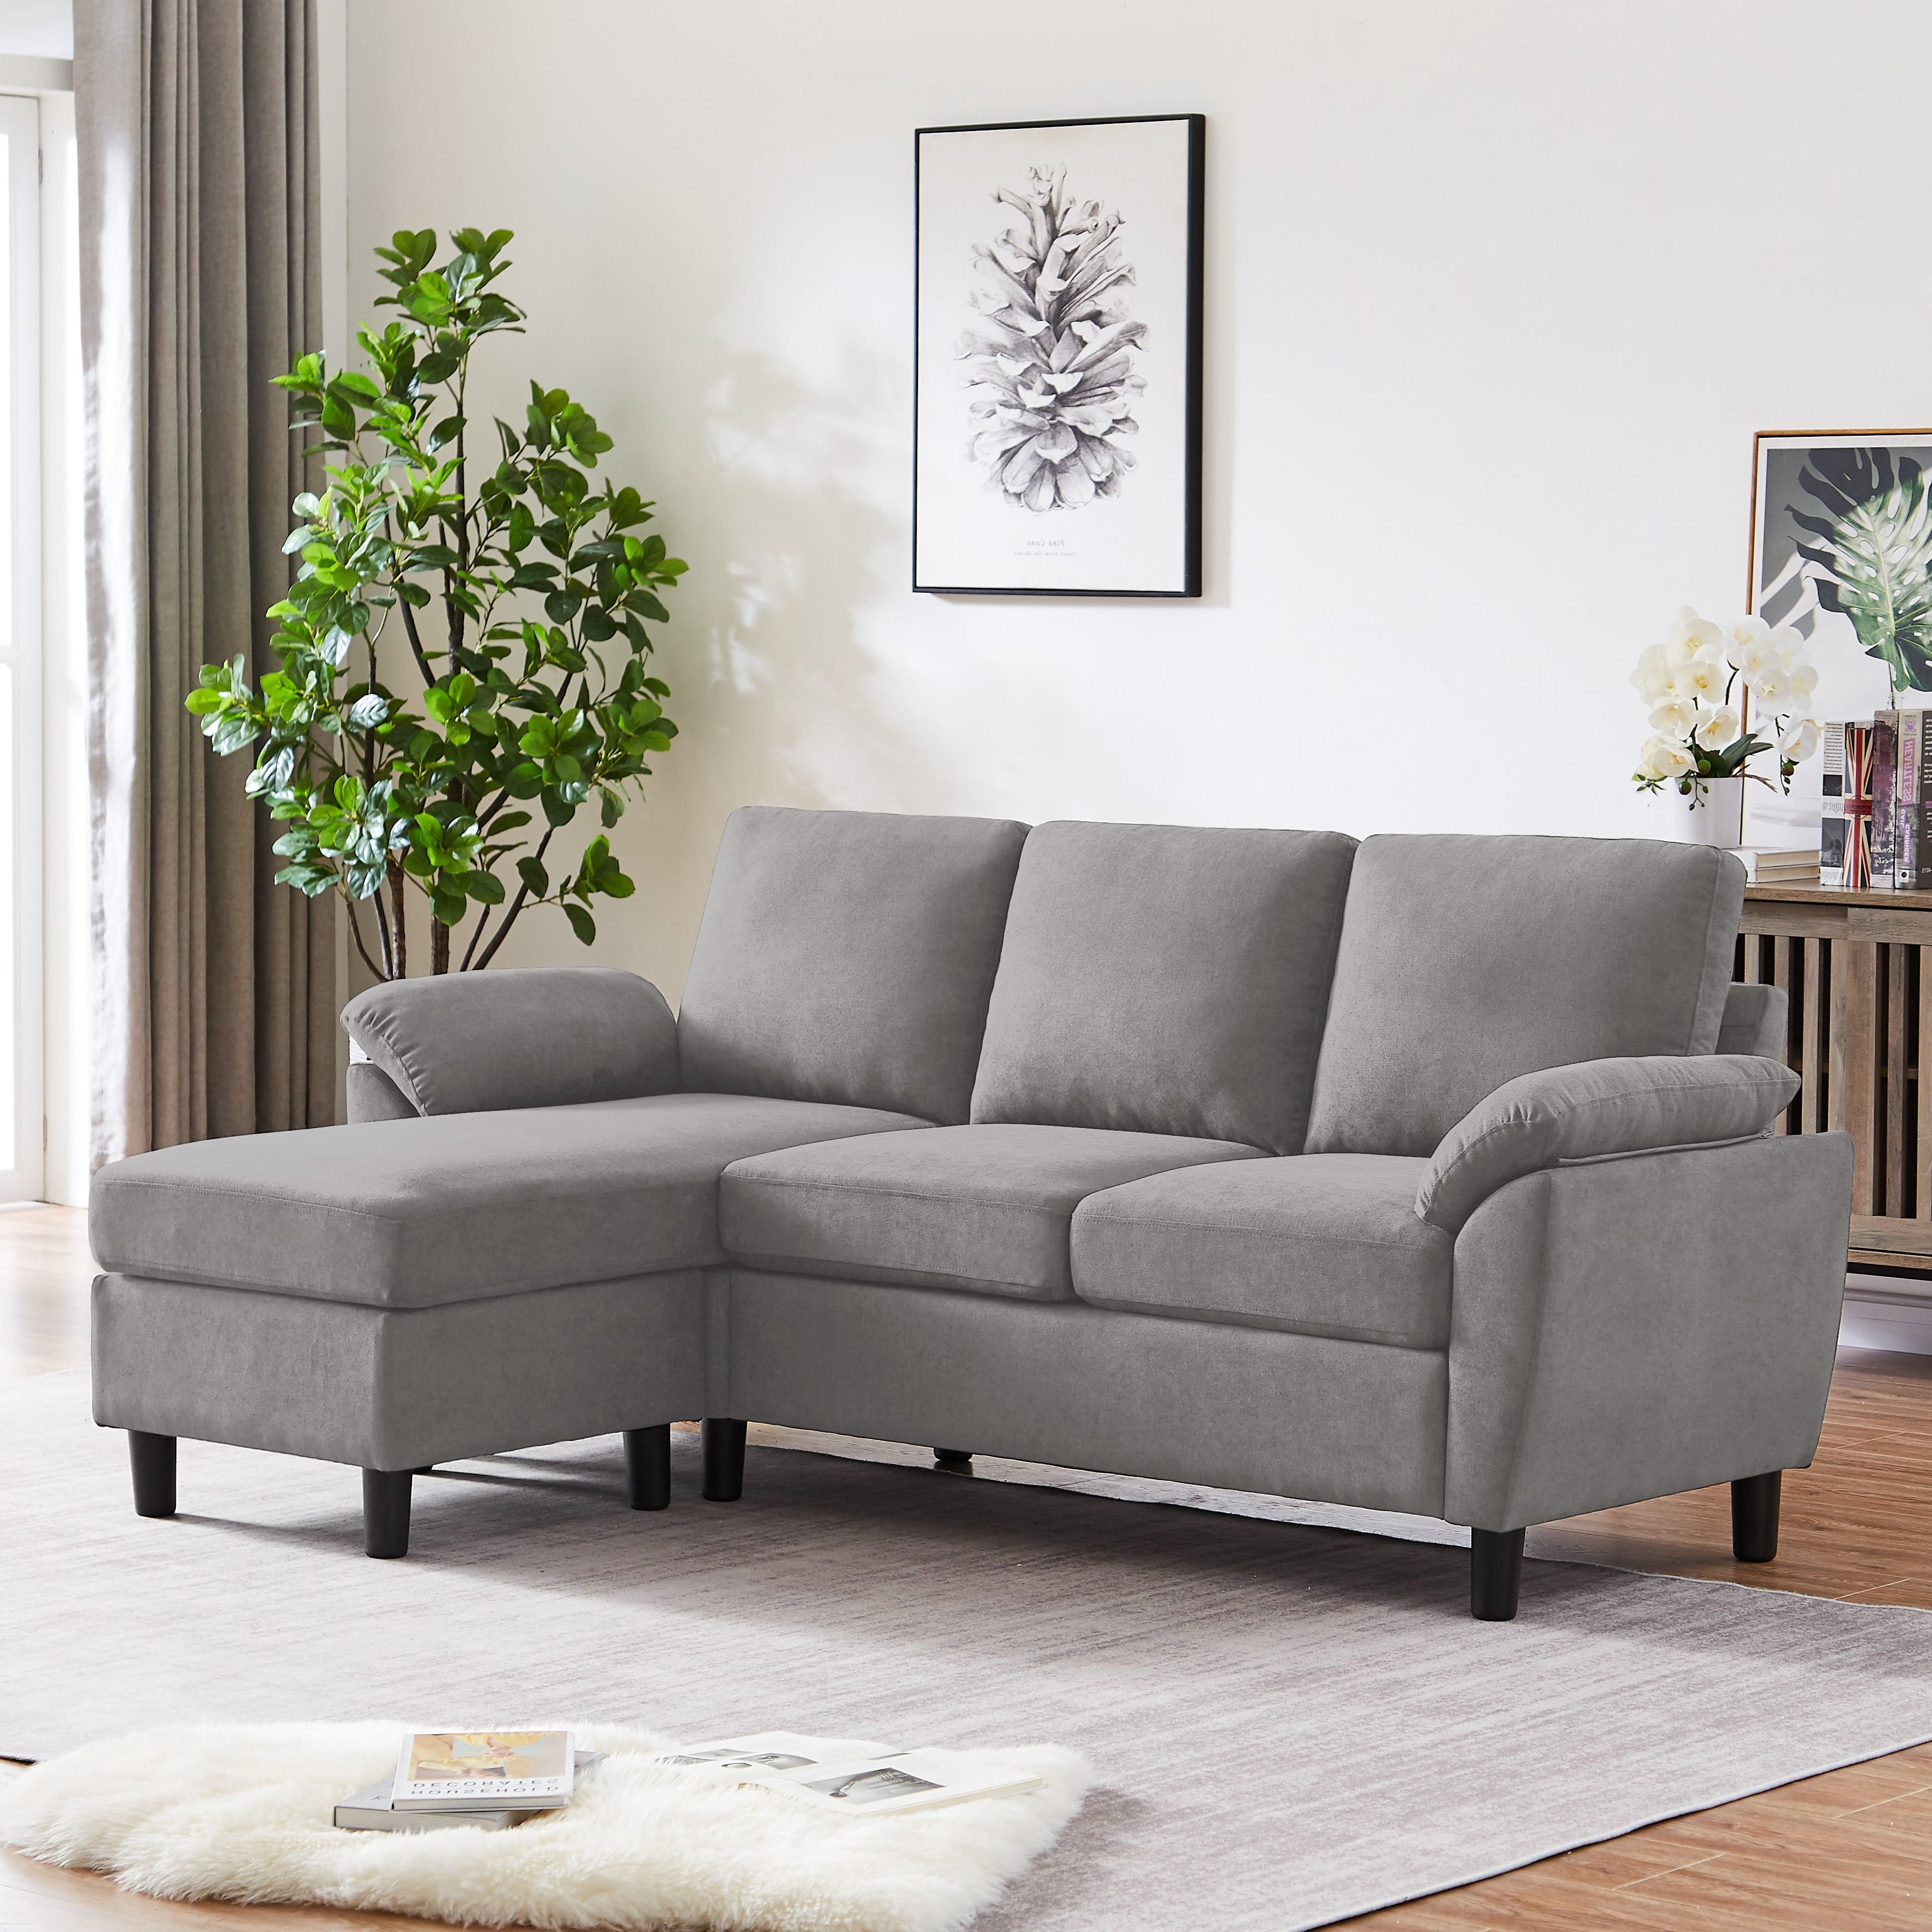 Jarenie Modern Fabric L Shapped Sofa Sectional Couches For Living Room Convertible  Sofa With Matching Chaise For Office, Apartment, Studio – Walmart Regarding Convertible Sofa With Matching Chaise (Gallery 3 of 20)